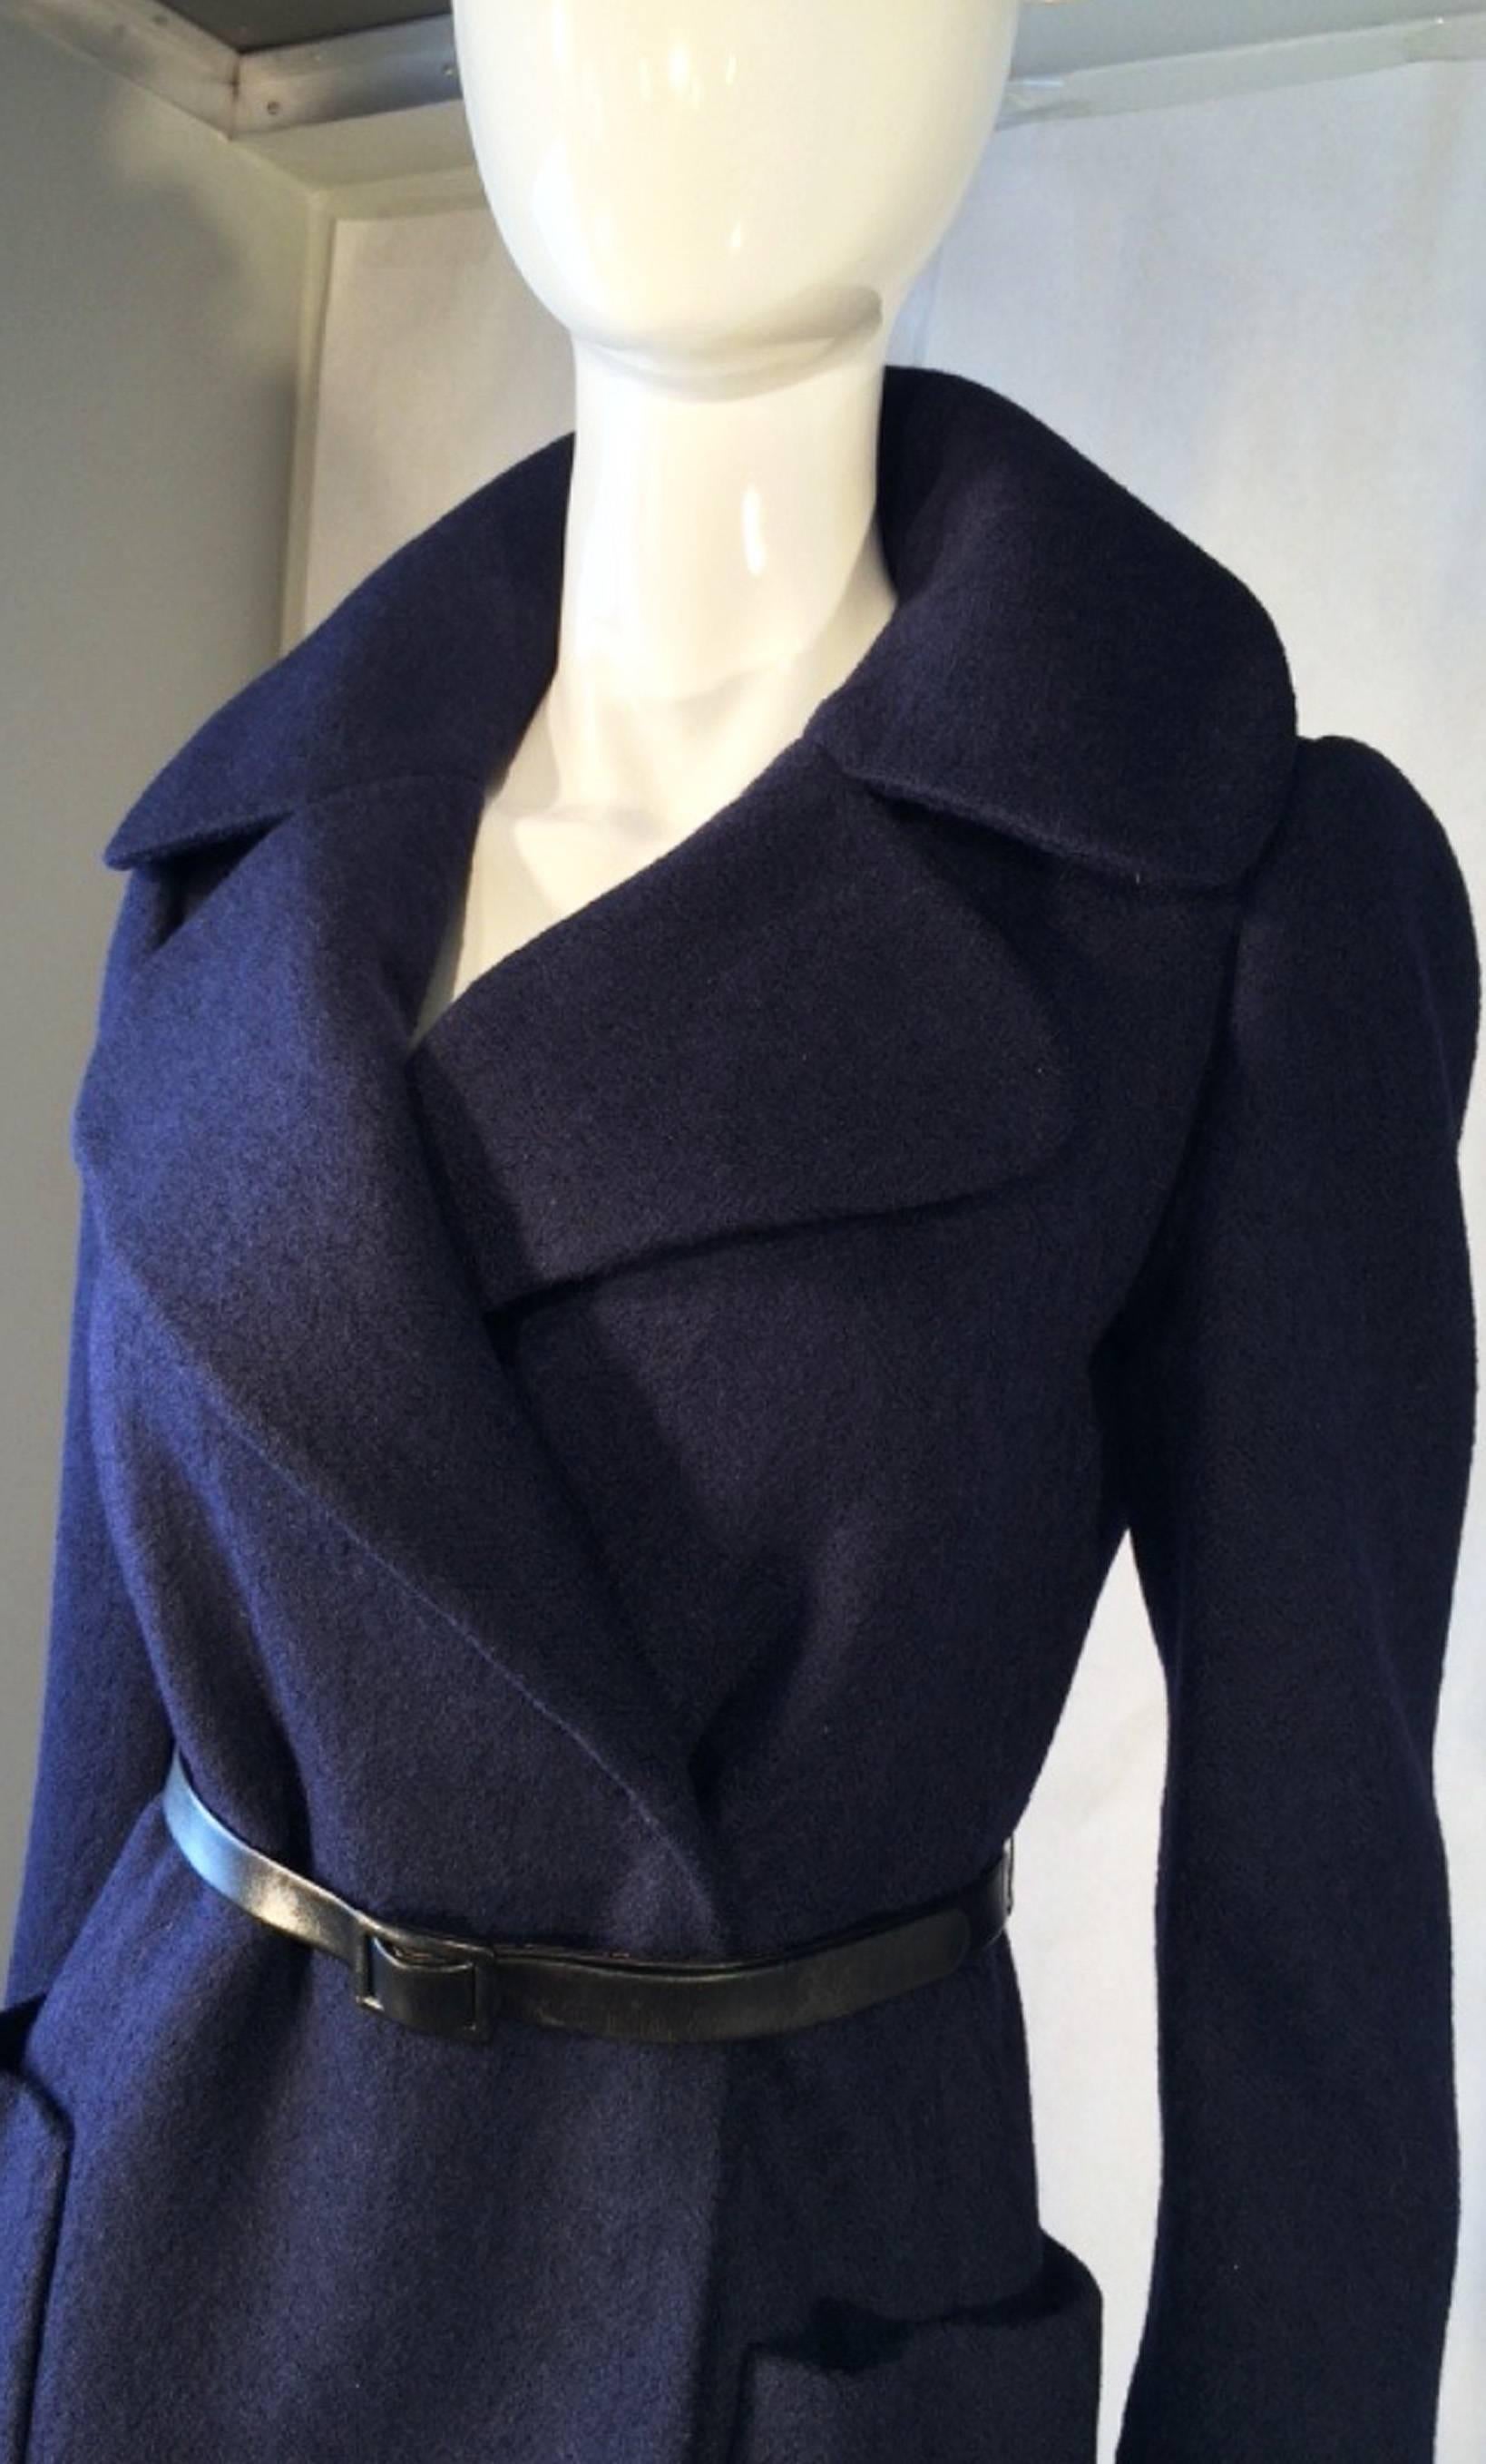 A fine and rare vintage  Norman Norell runway/sample jacket. Navy wool fabric item features a wrap front and fully silk lined. Item retains original signed leather cinch belt with partial missing belt lining (neither detracts nor diminishes). Rare